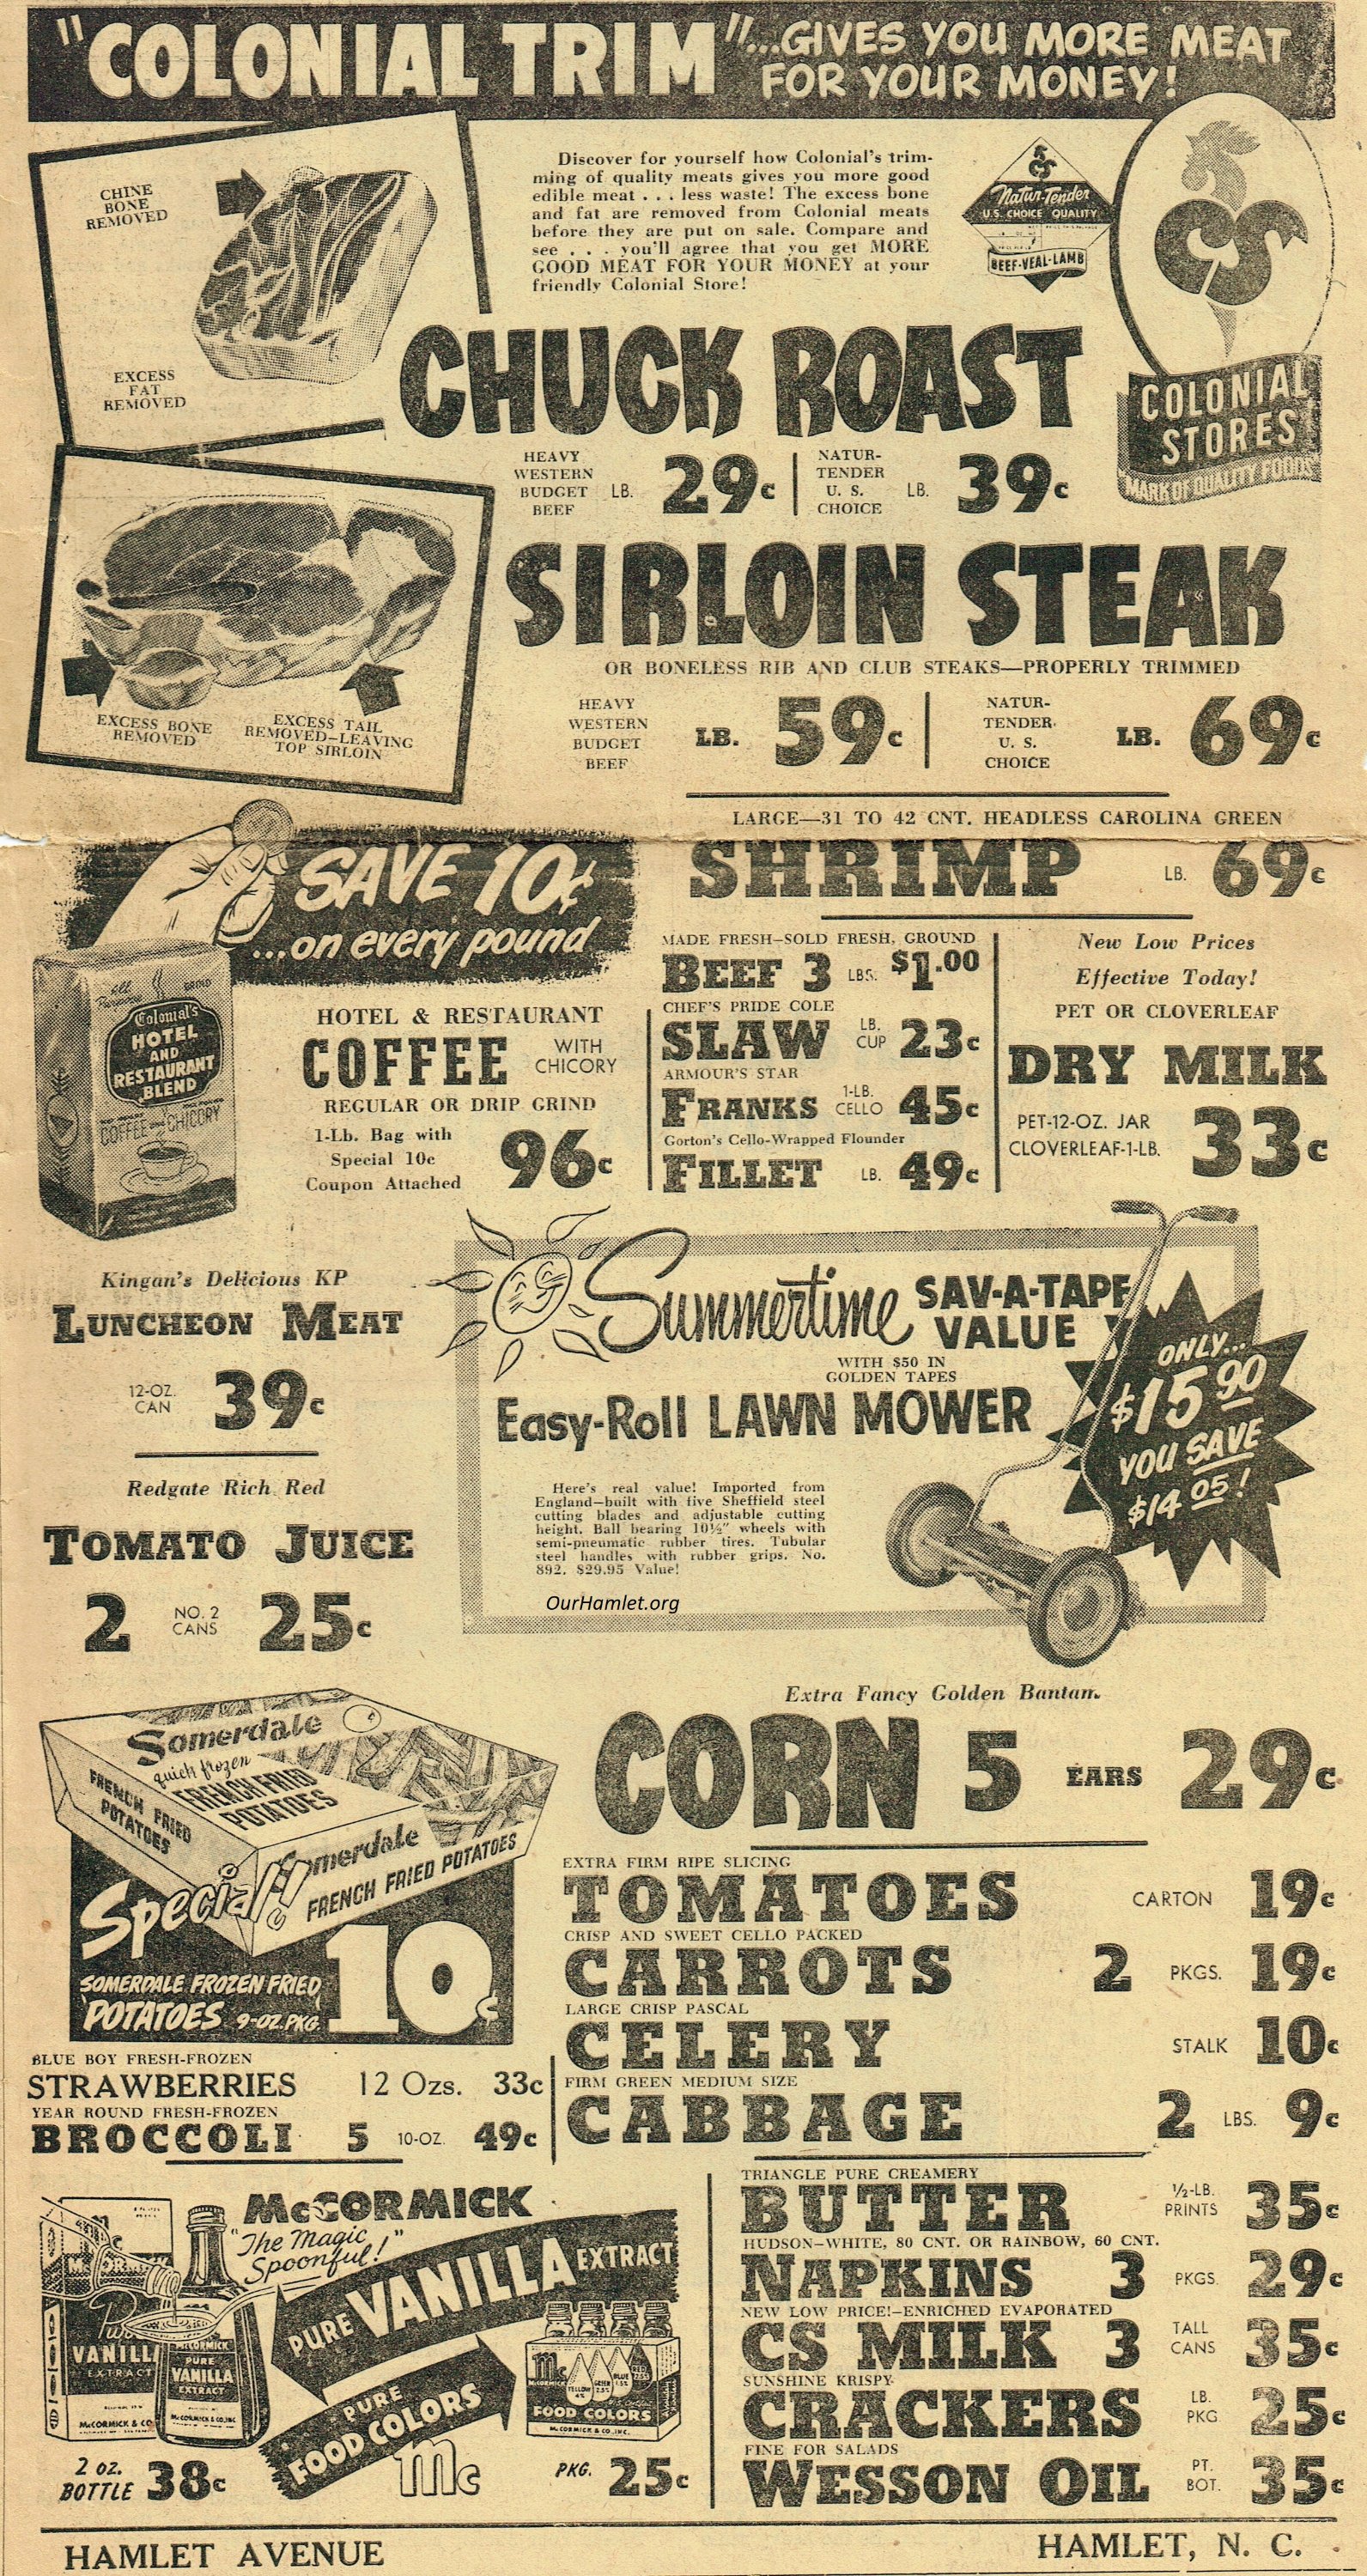 1954 Colonial Store ad OH.jpg